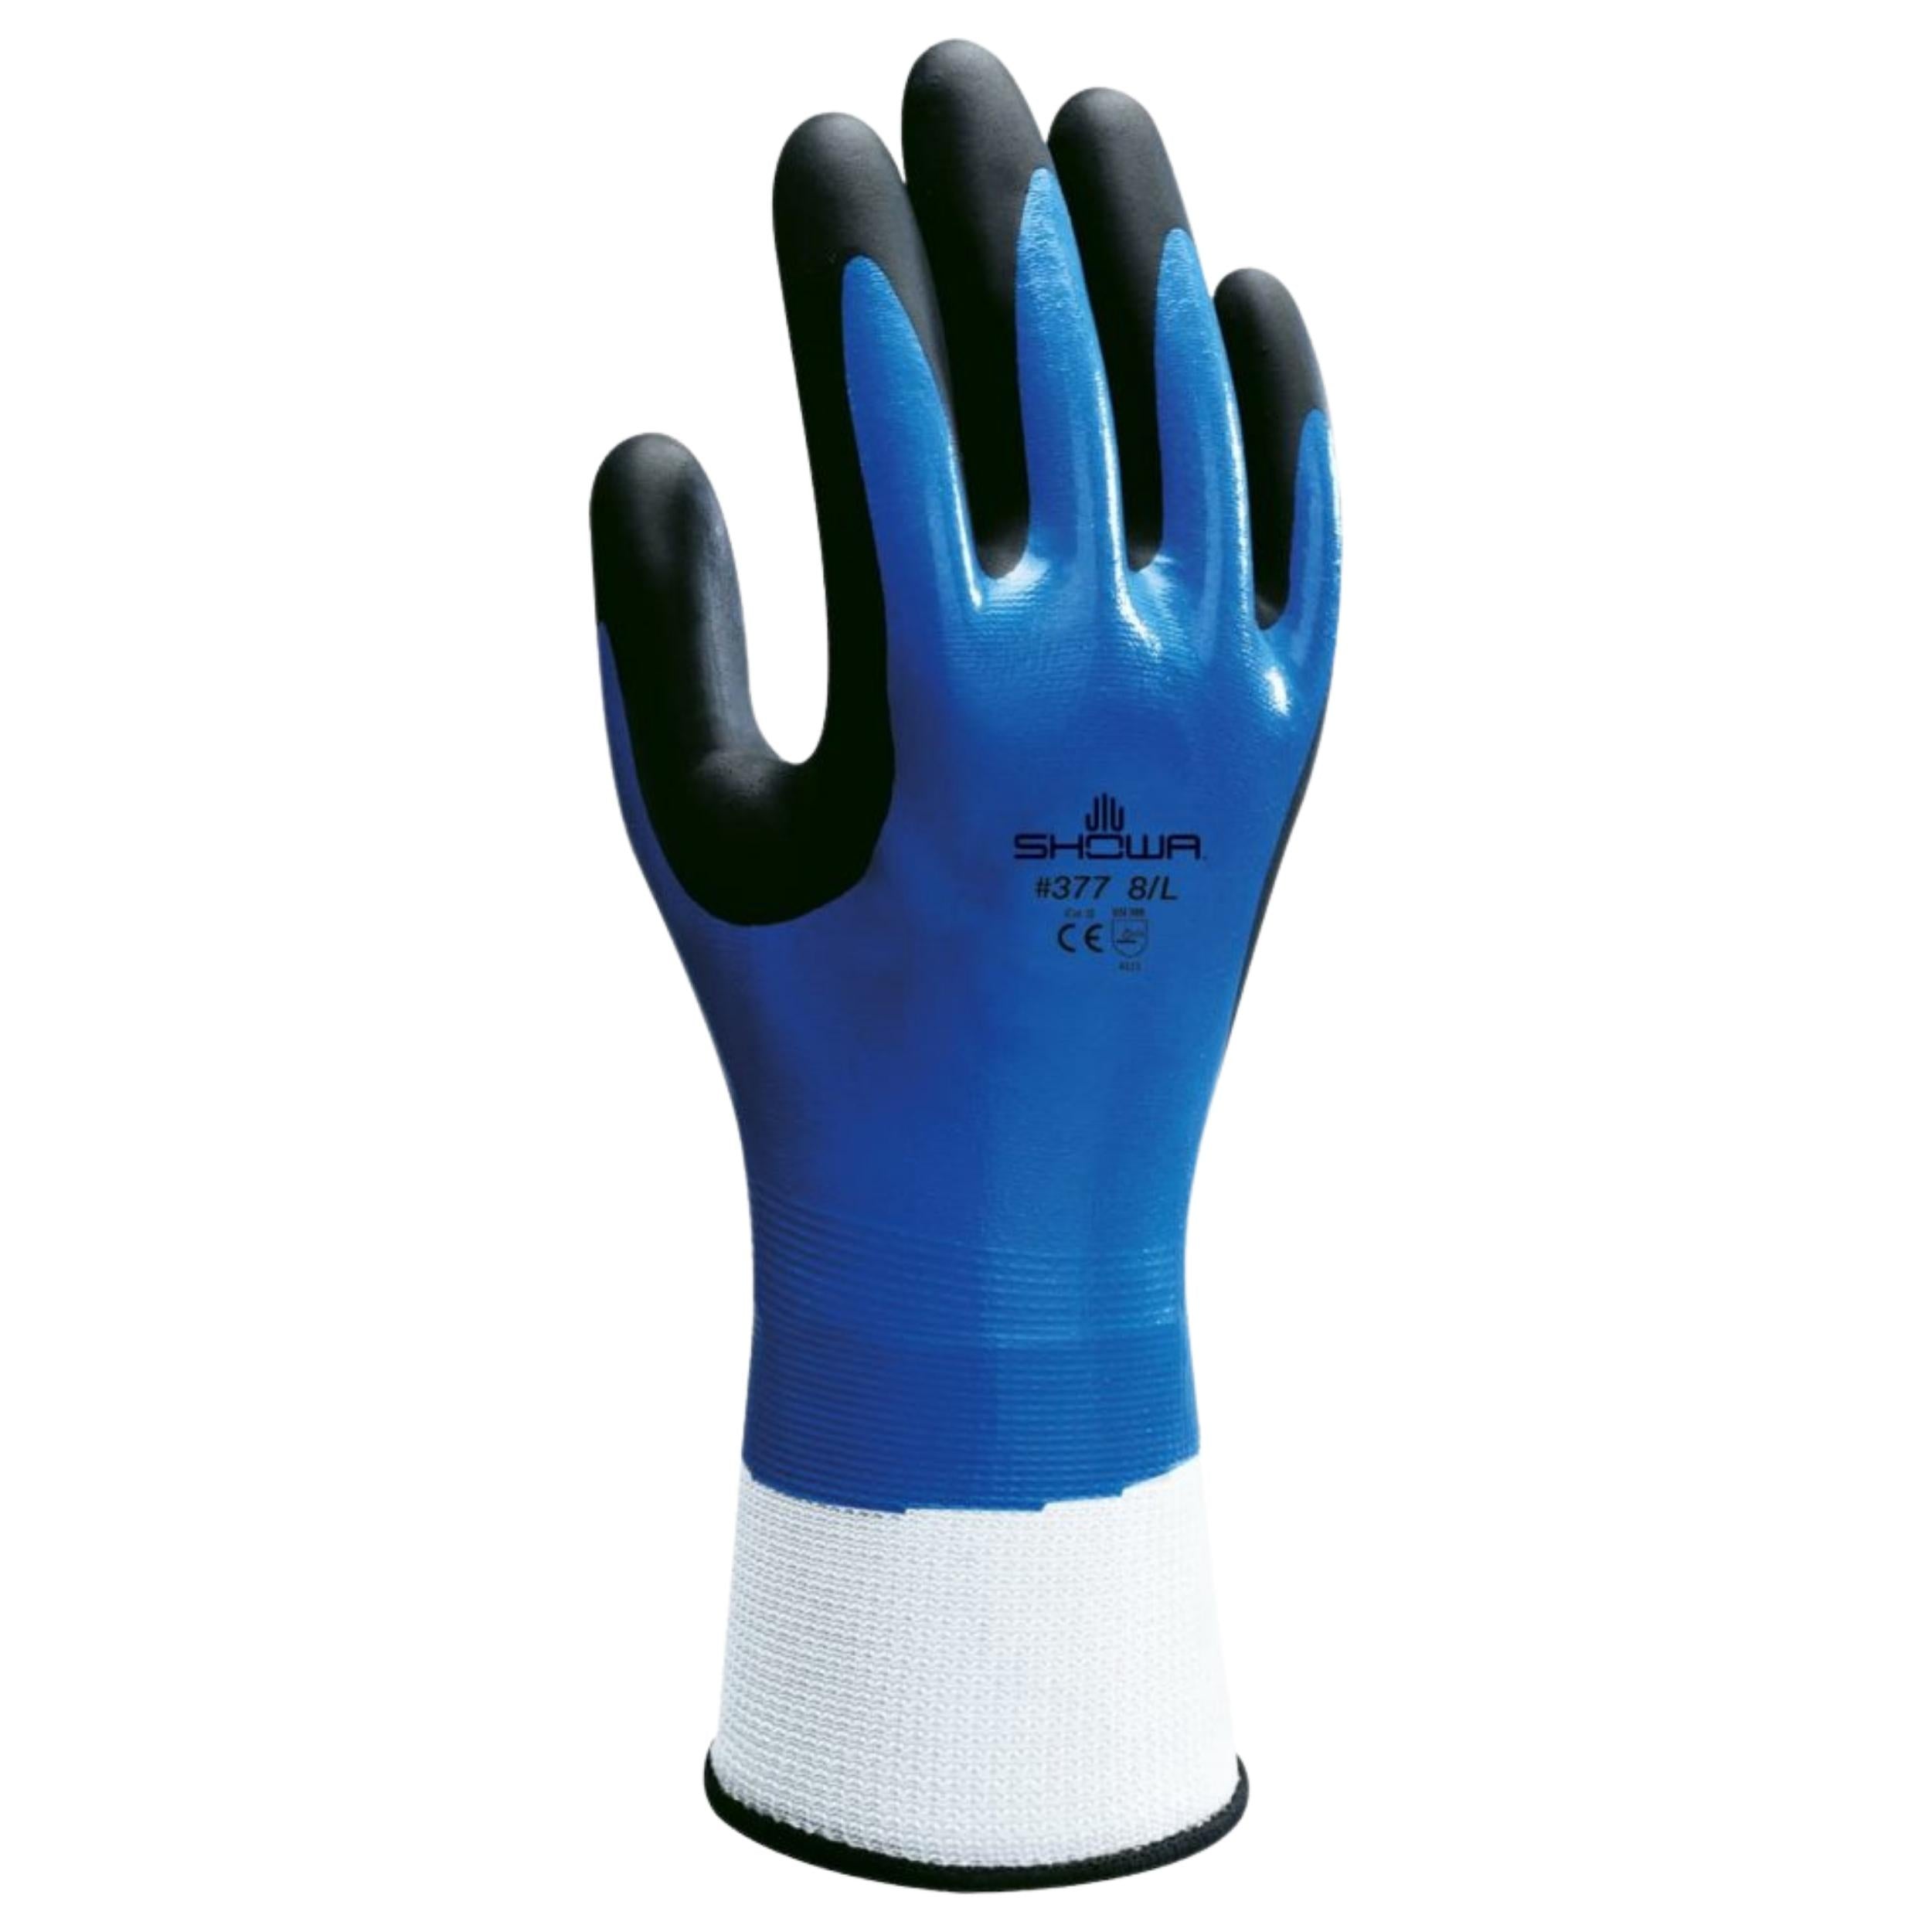 SHOWA 377: Chemical-Resistant Gloves 2 PAIR